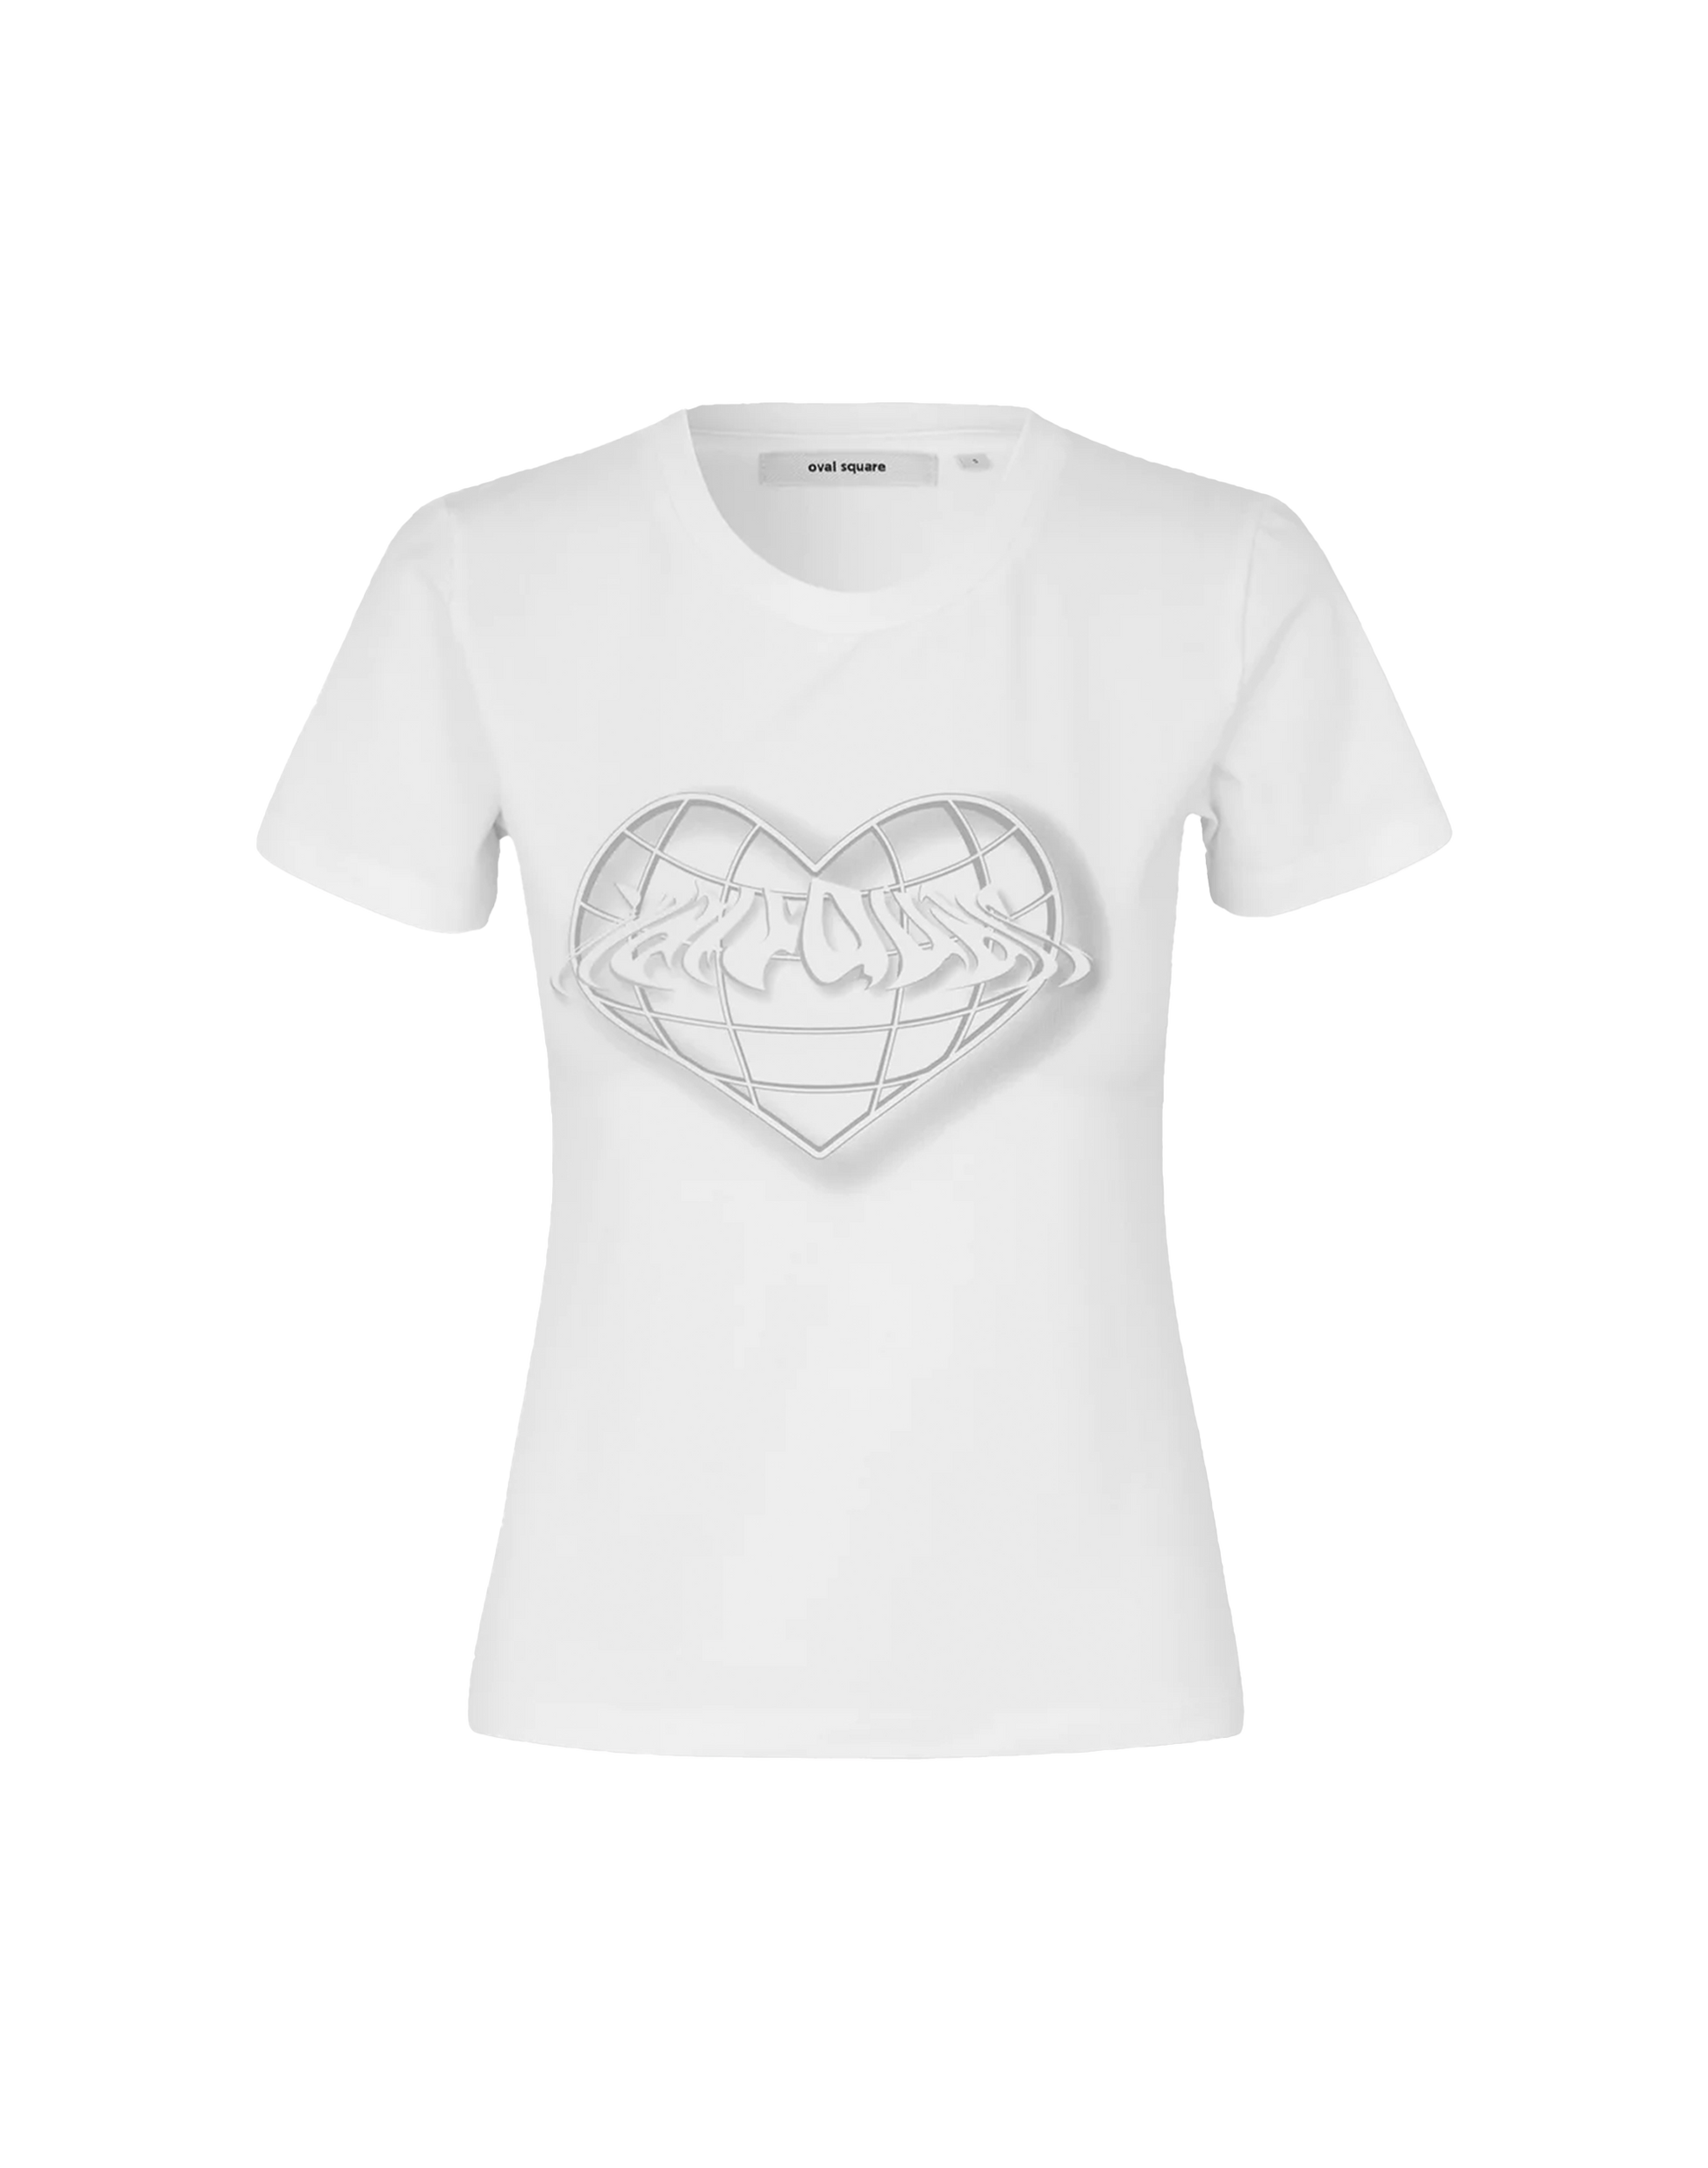 OVAL SQUARE Bella T-Shirt in Weiß, Ansicht Frontal